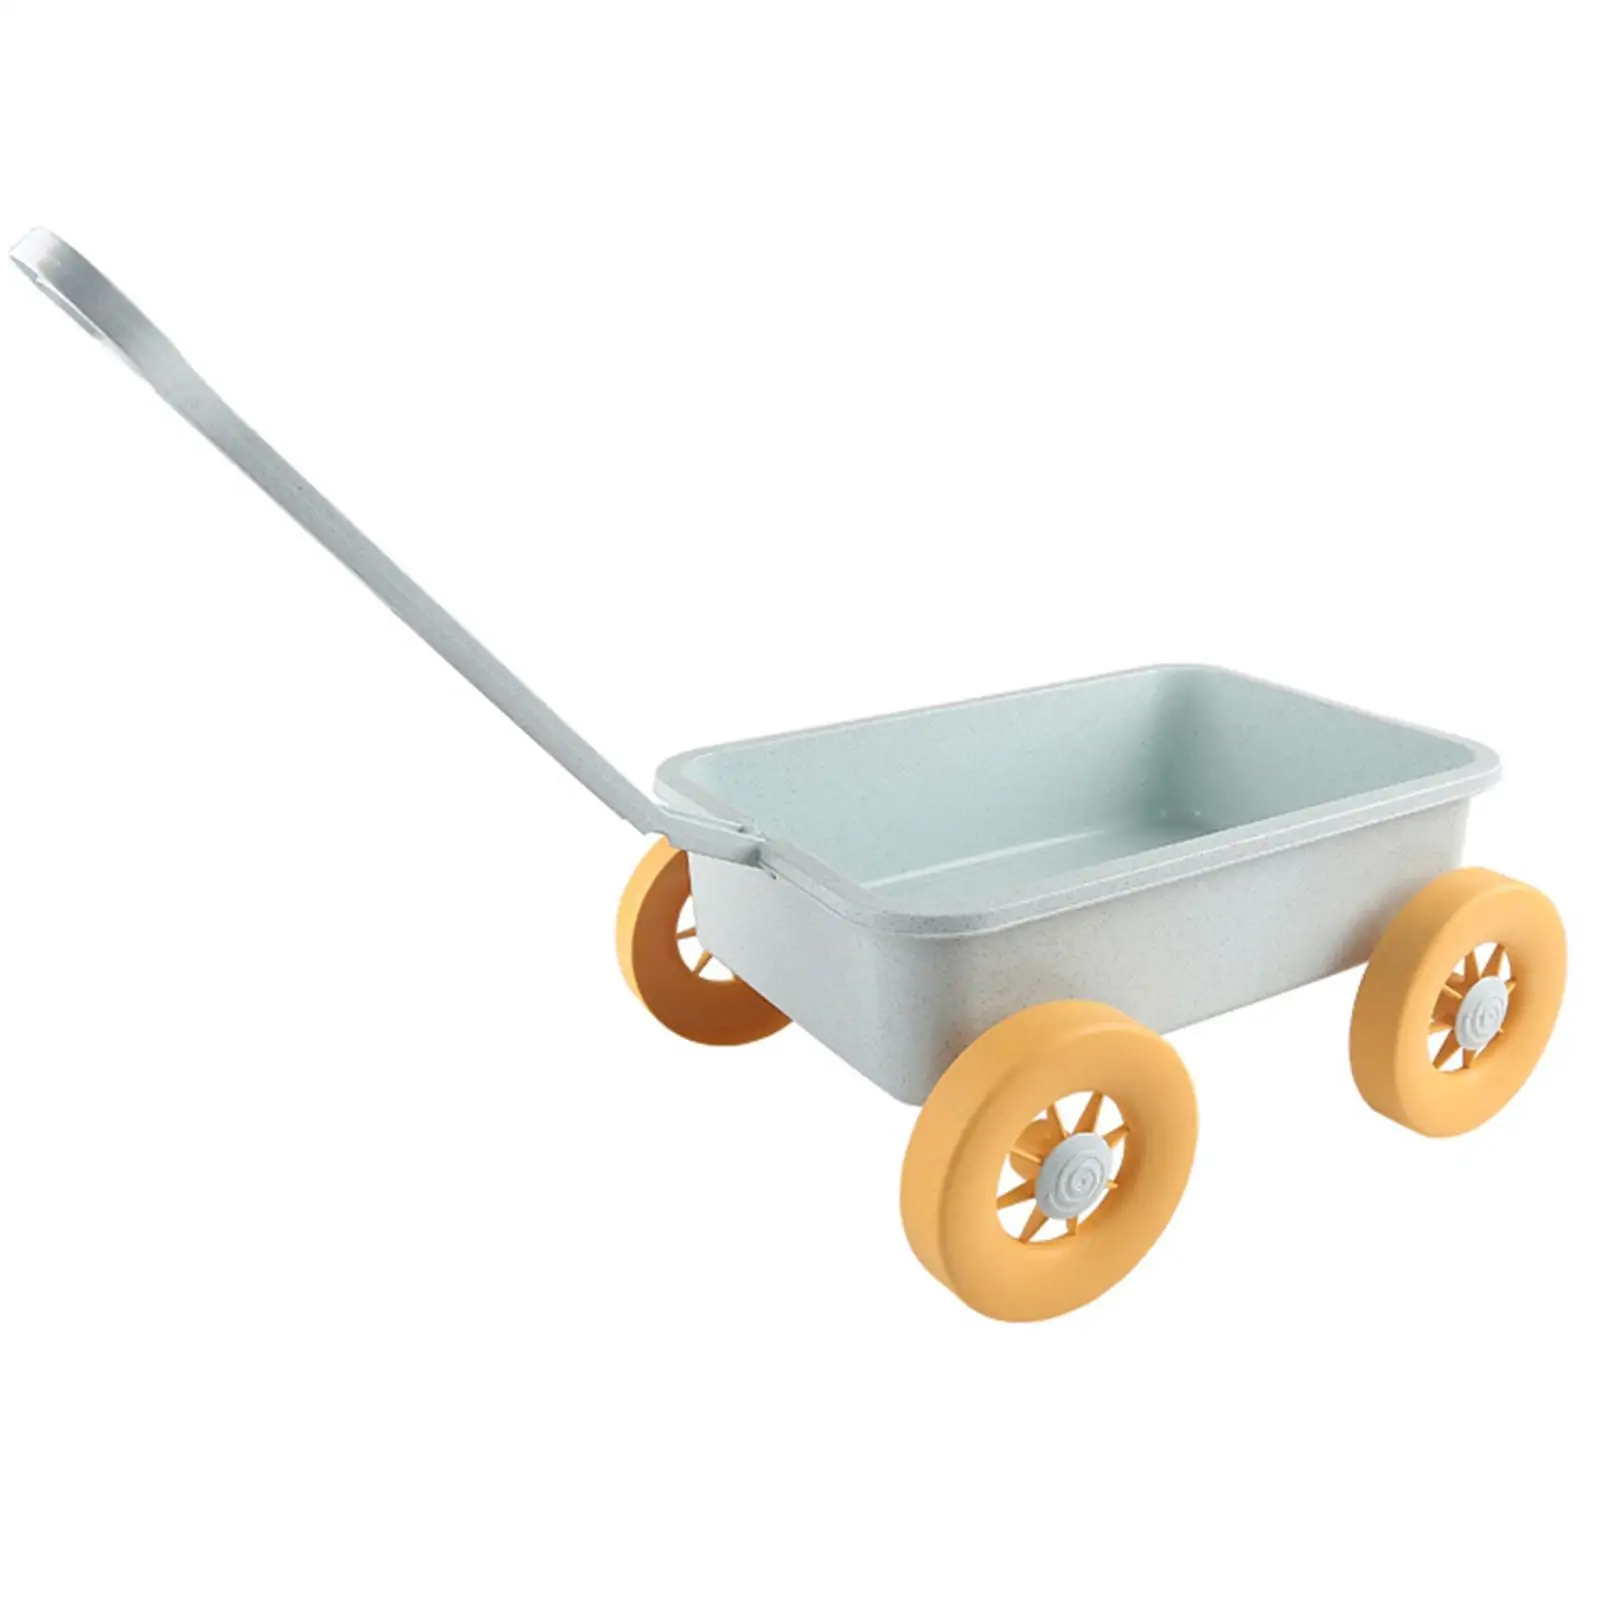 Play Wagon Beach Toys Vehicle Garden Wagon Tools Toy Small Wagon Toys for Stuffed Animals Holding Small Toys